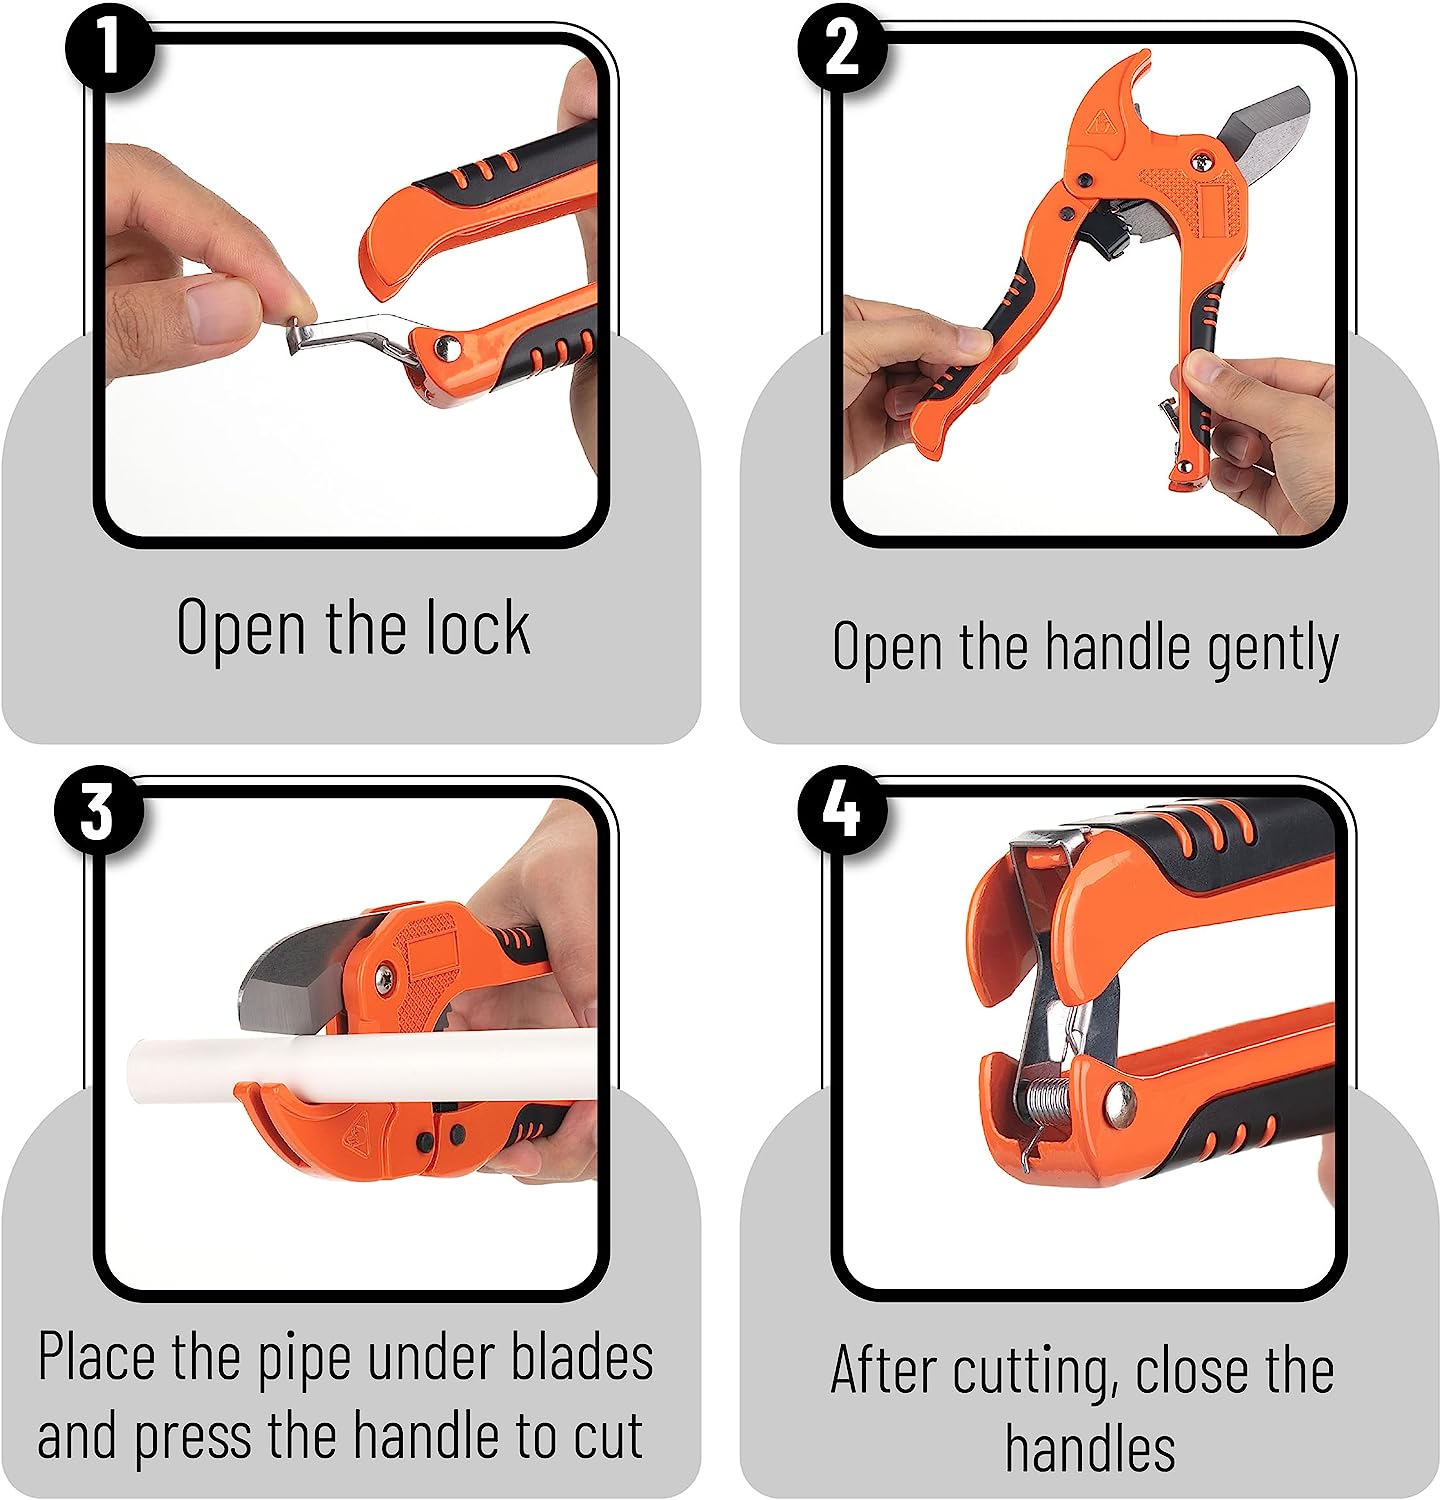 Buy PVC Pipe Cutter Tool - Cuts Up to 1-1/4 Inch Pipe